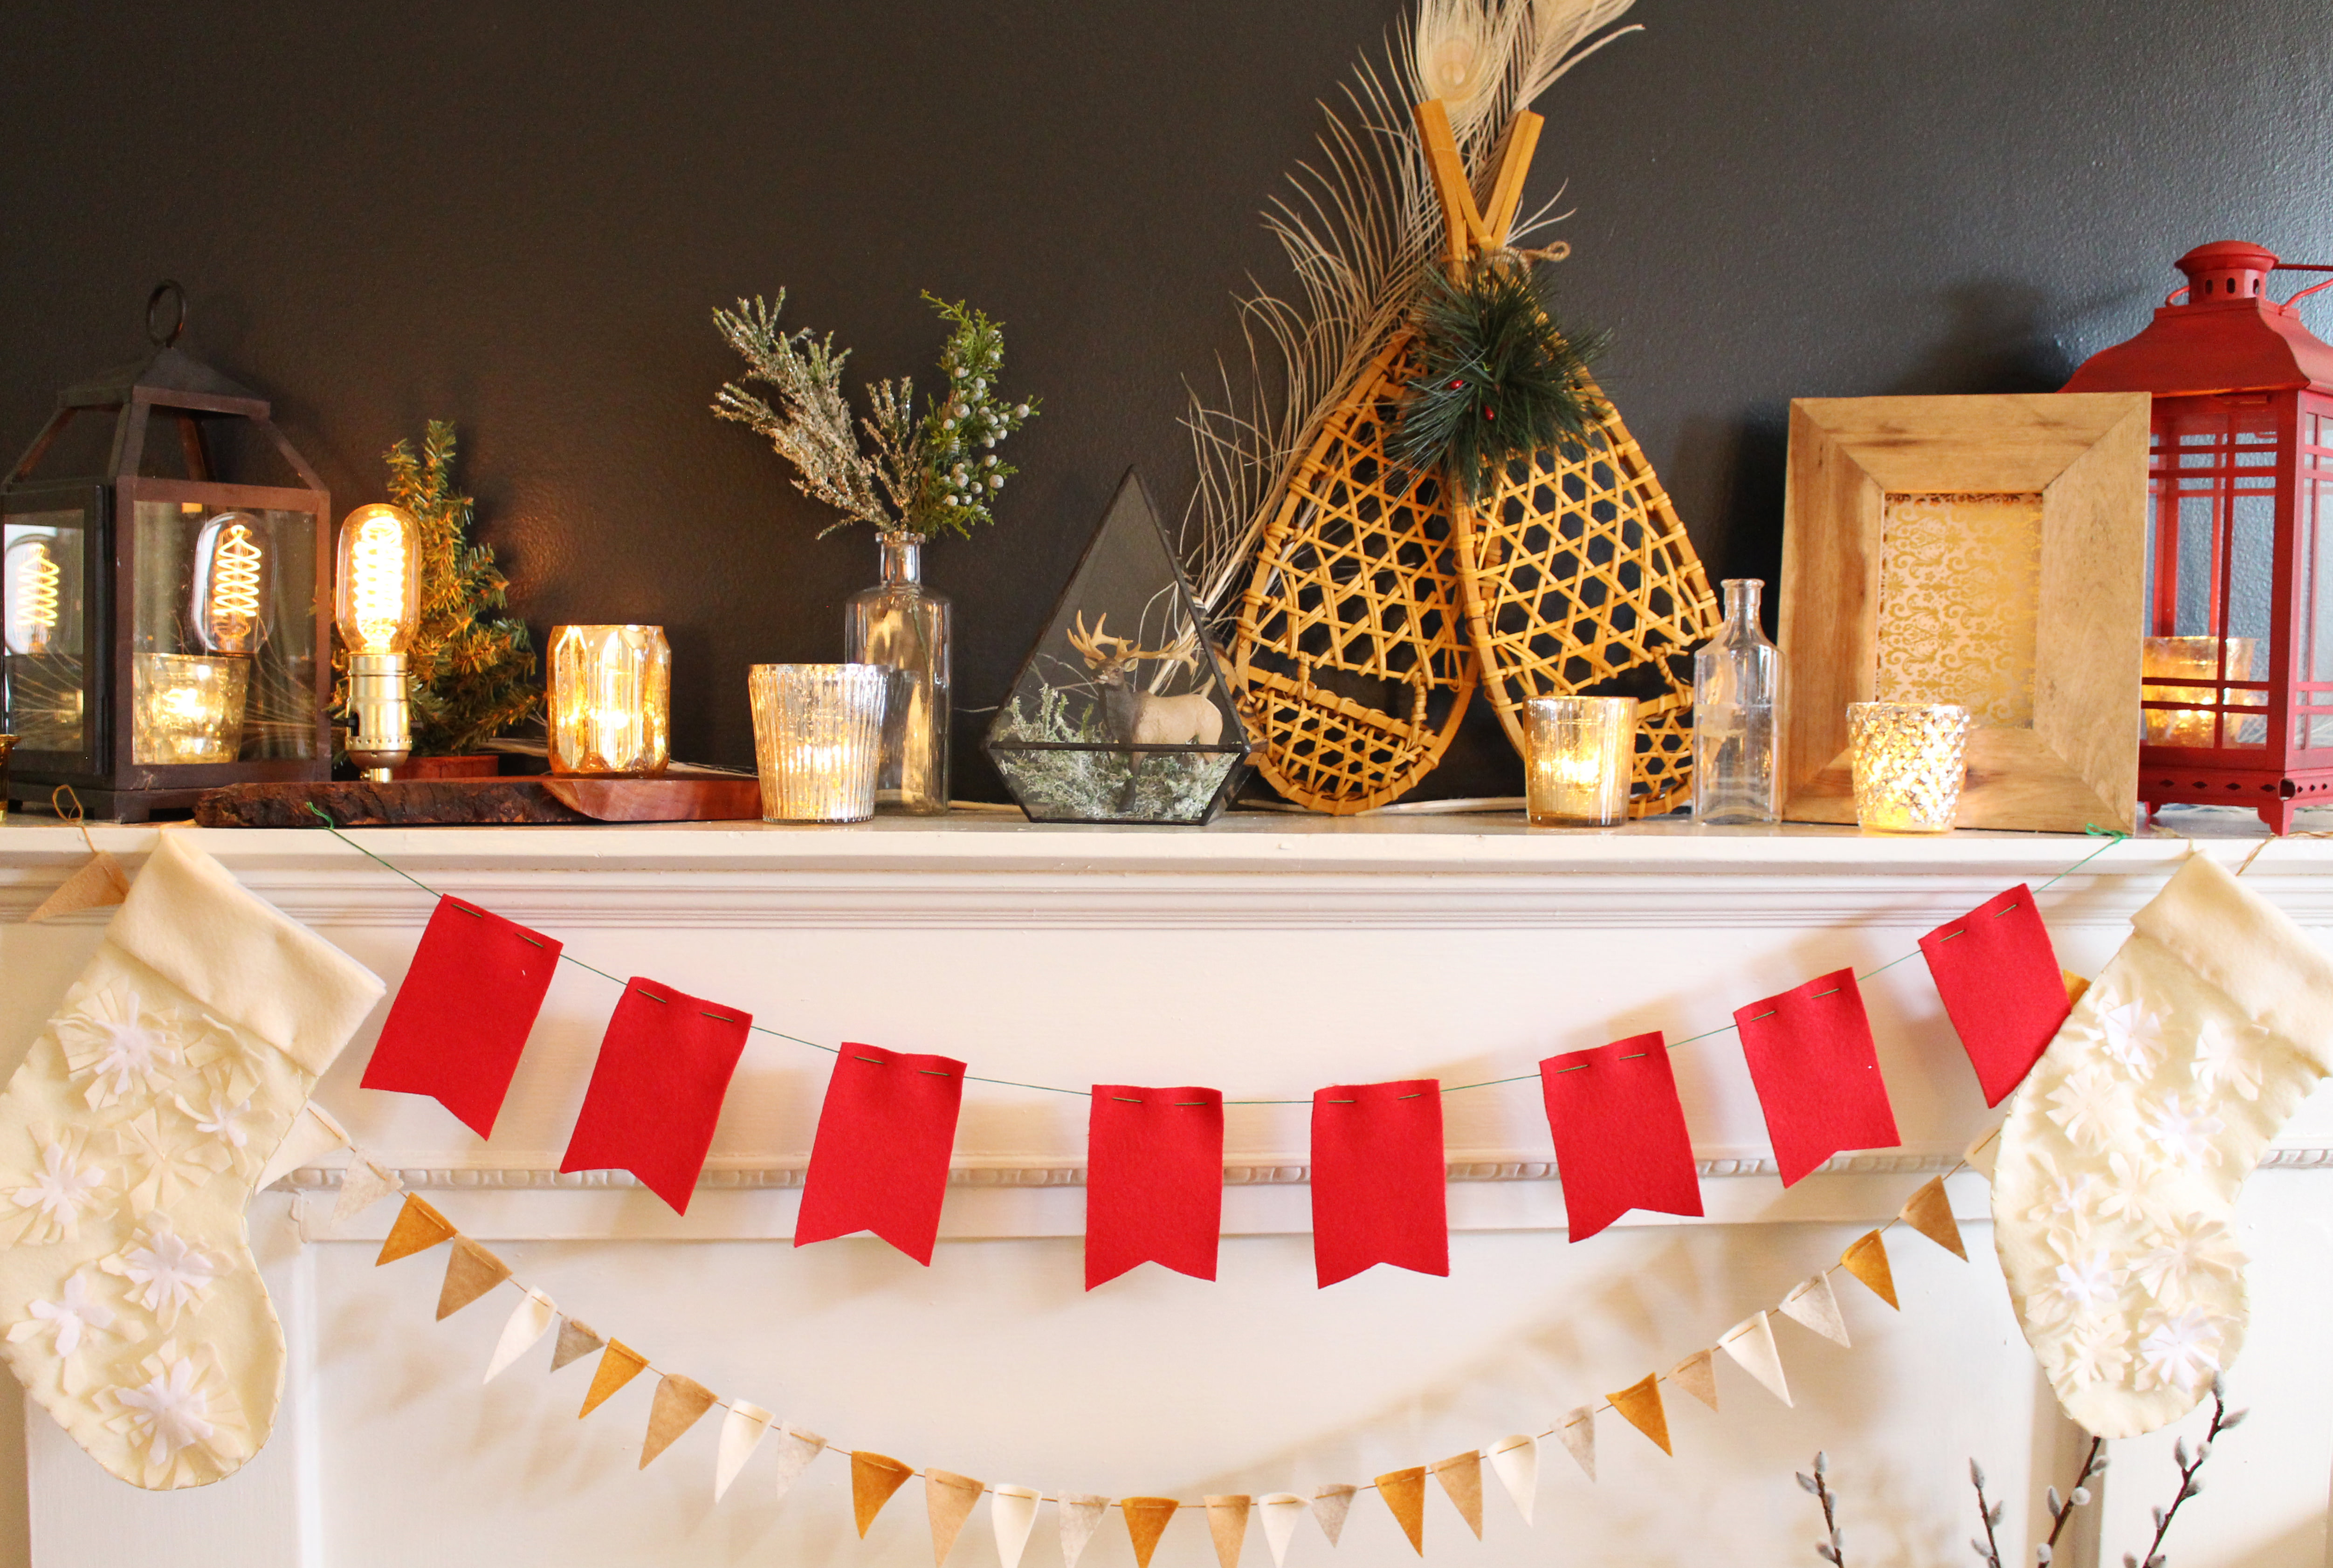 DIY Holiday Felt Banners are perfect for mantel displays